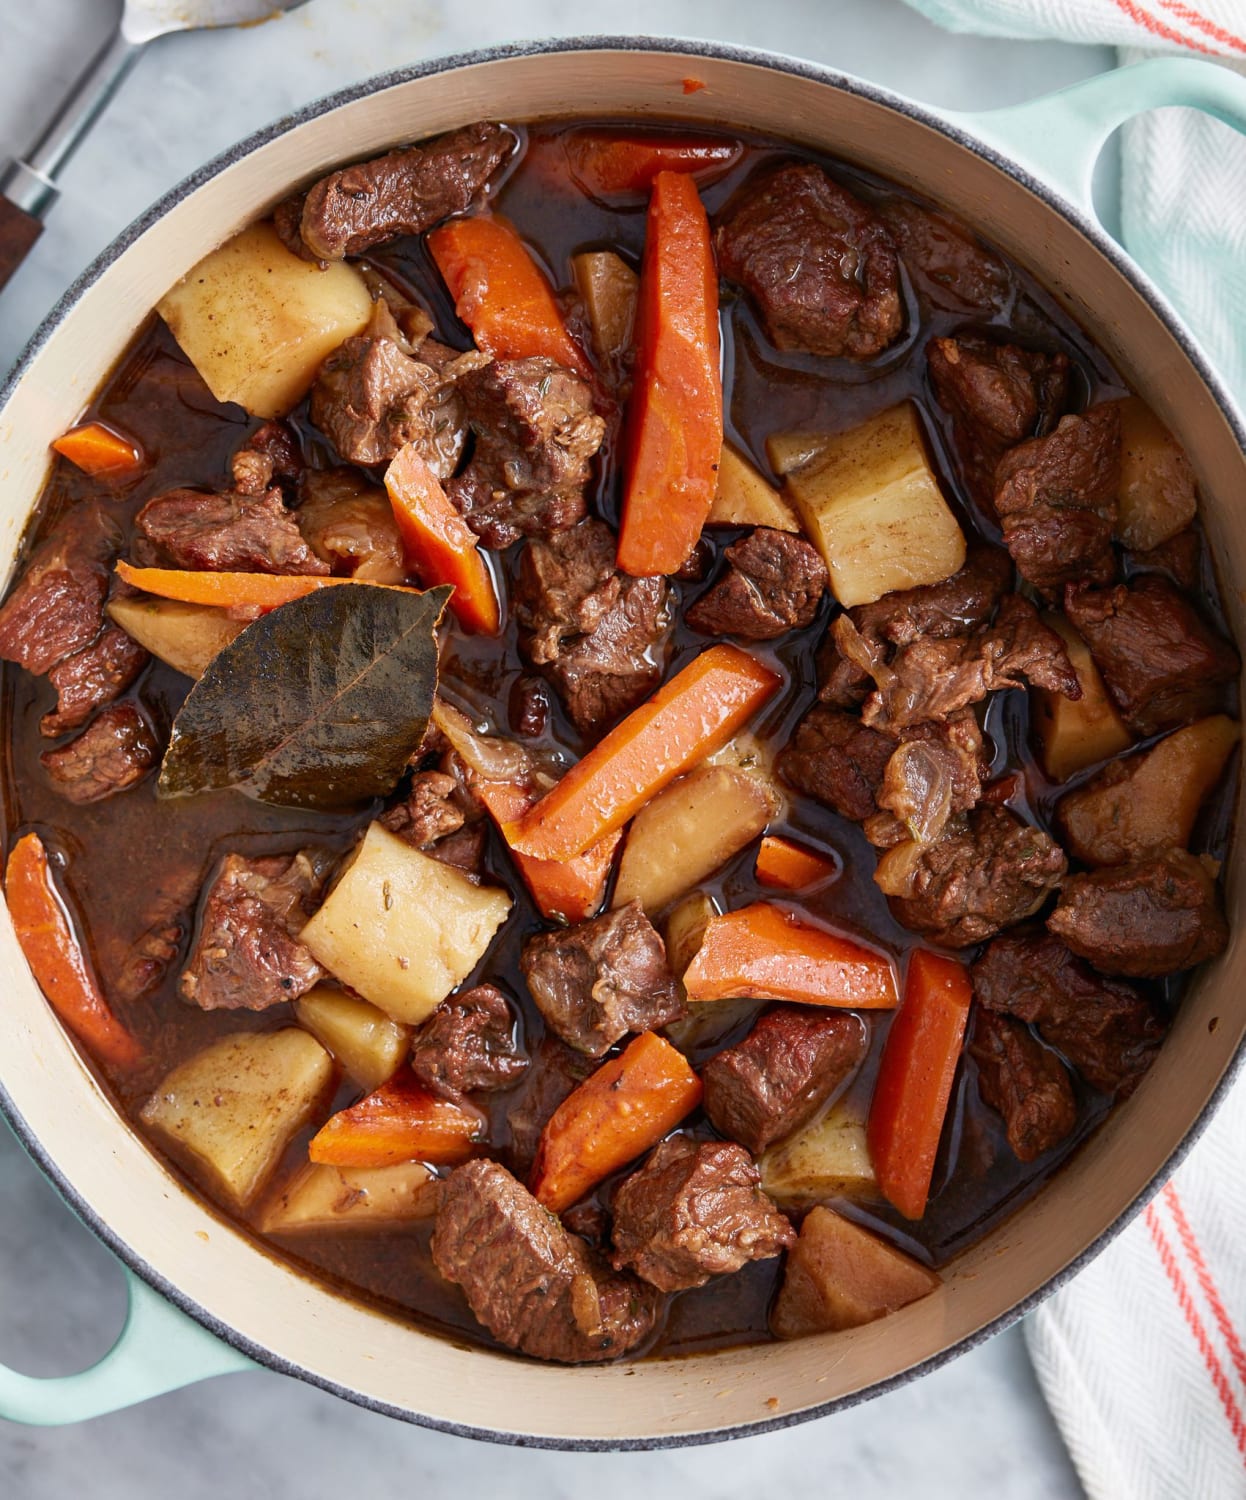 This hearty Irish stew is a best-seller at @Ivysfeast's family's pub. Here's how to make it at home: